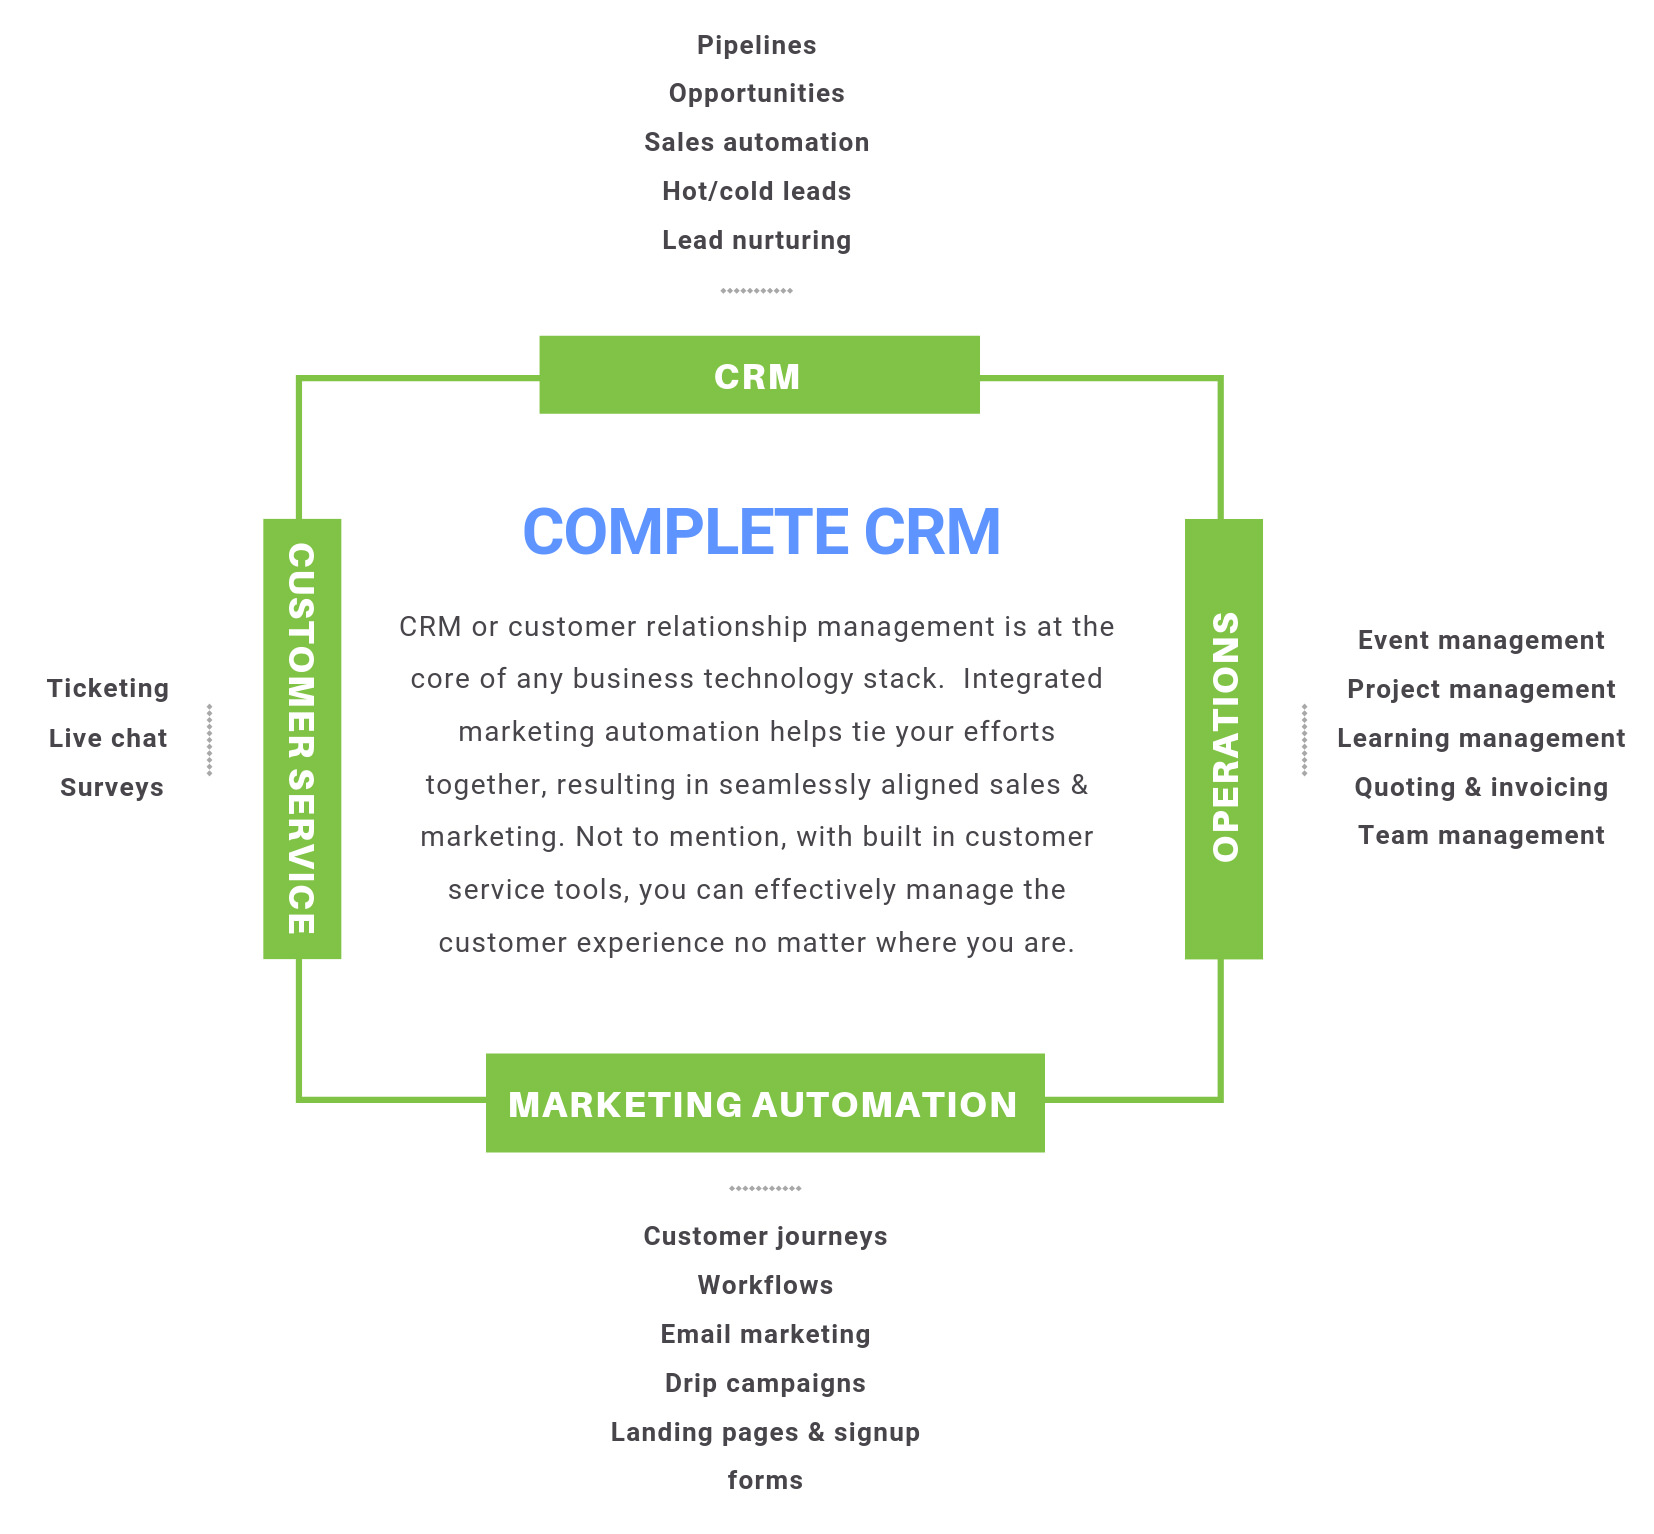 What is Complete CRM